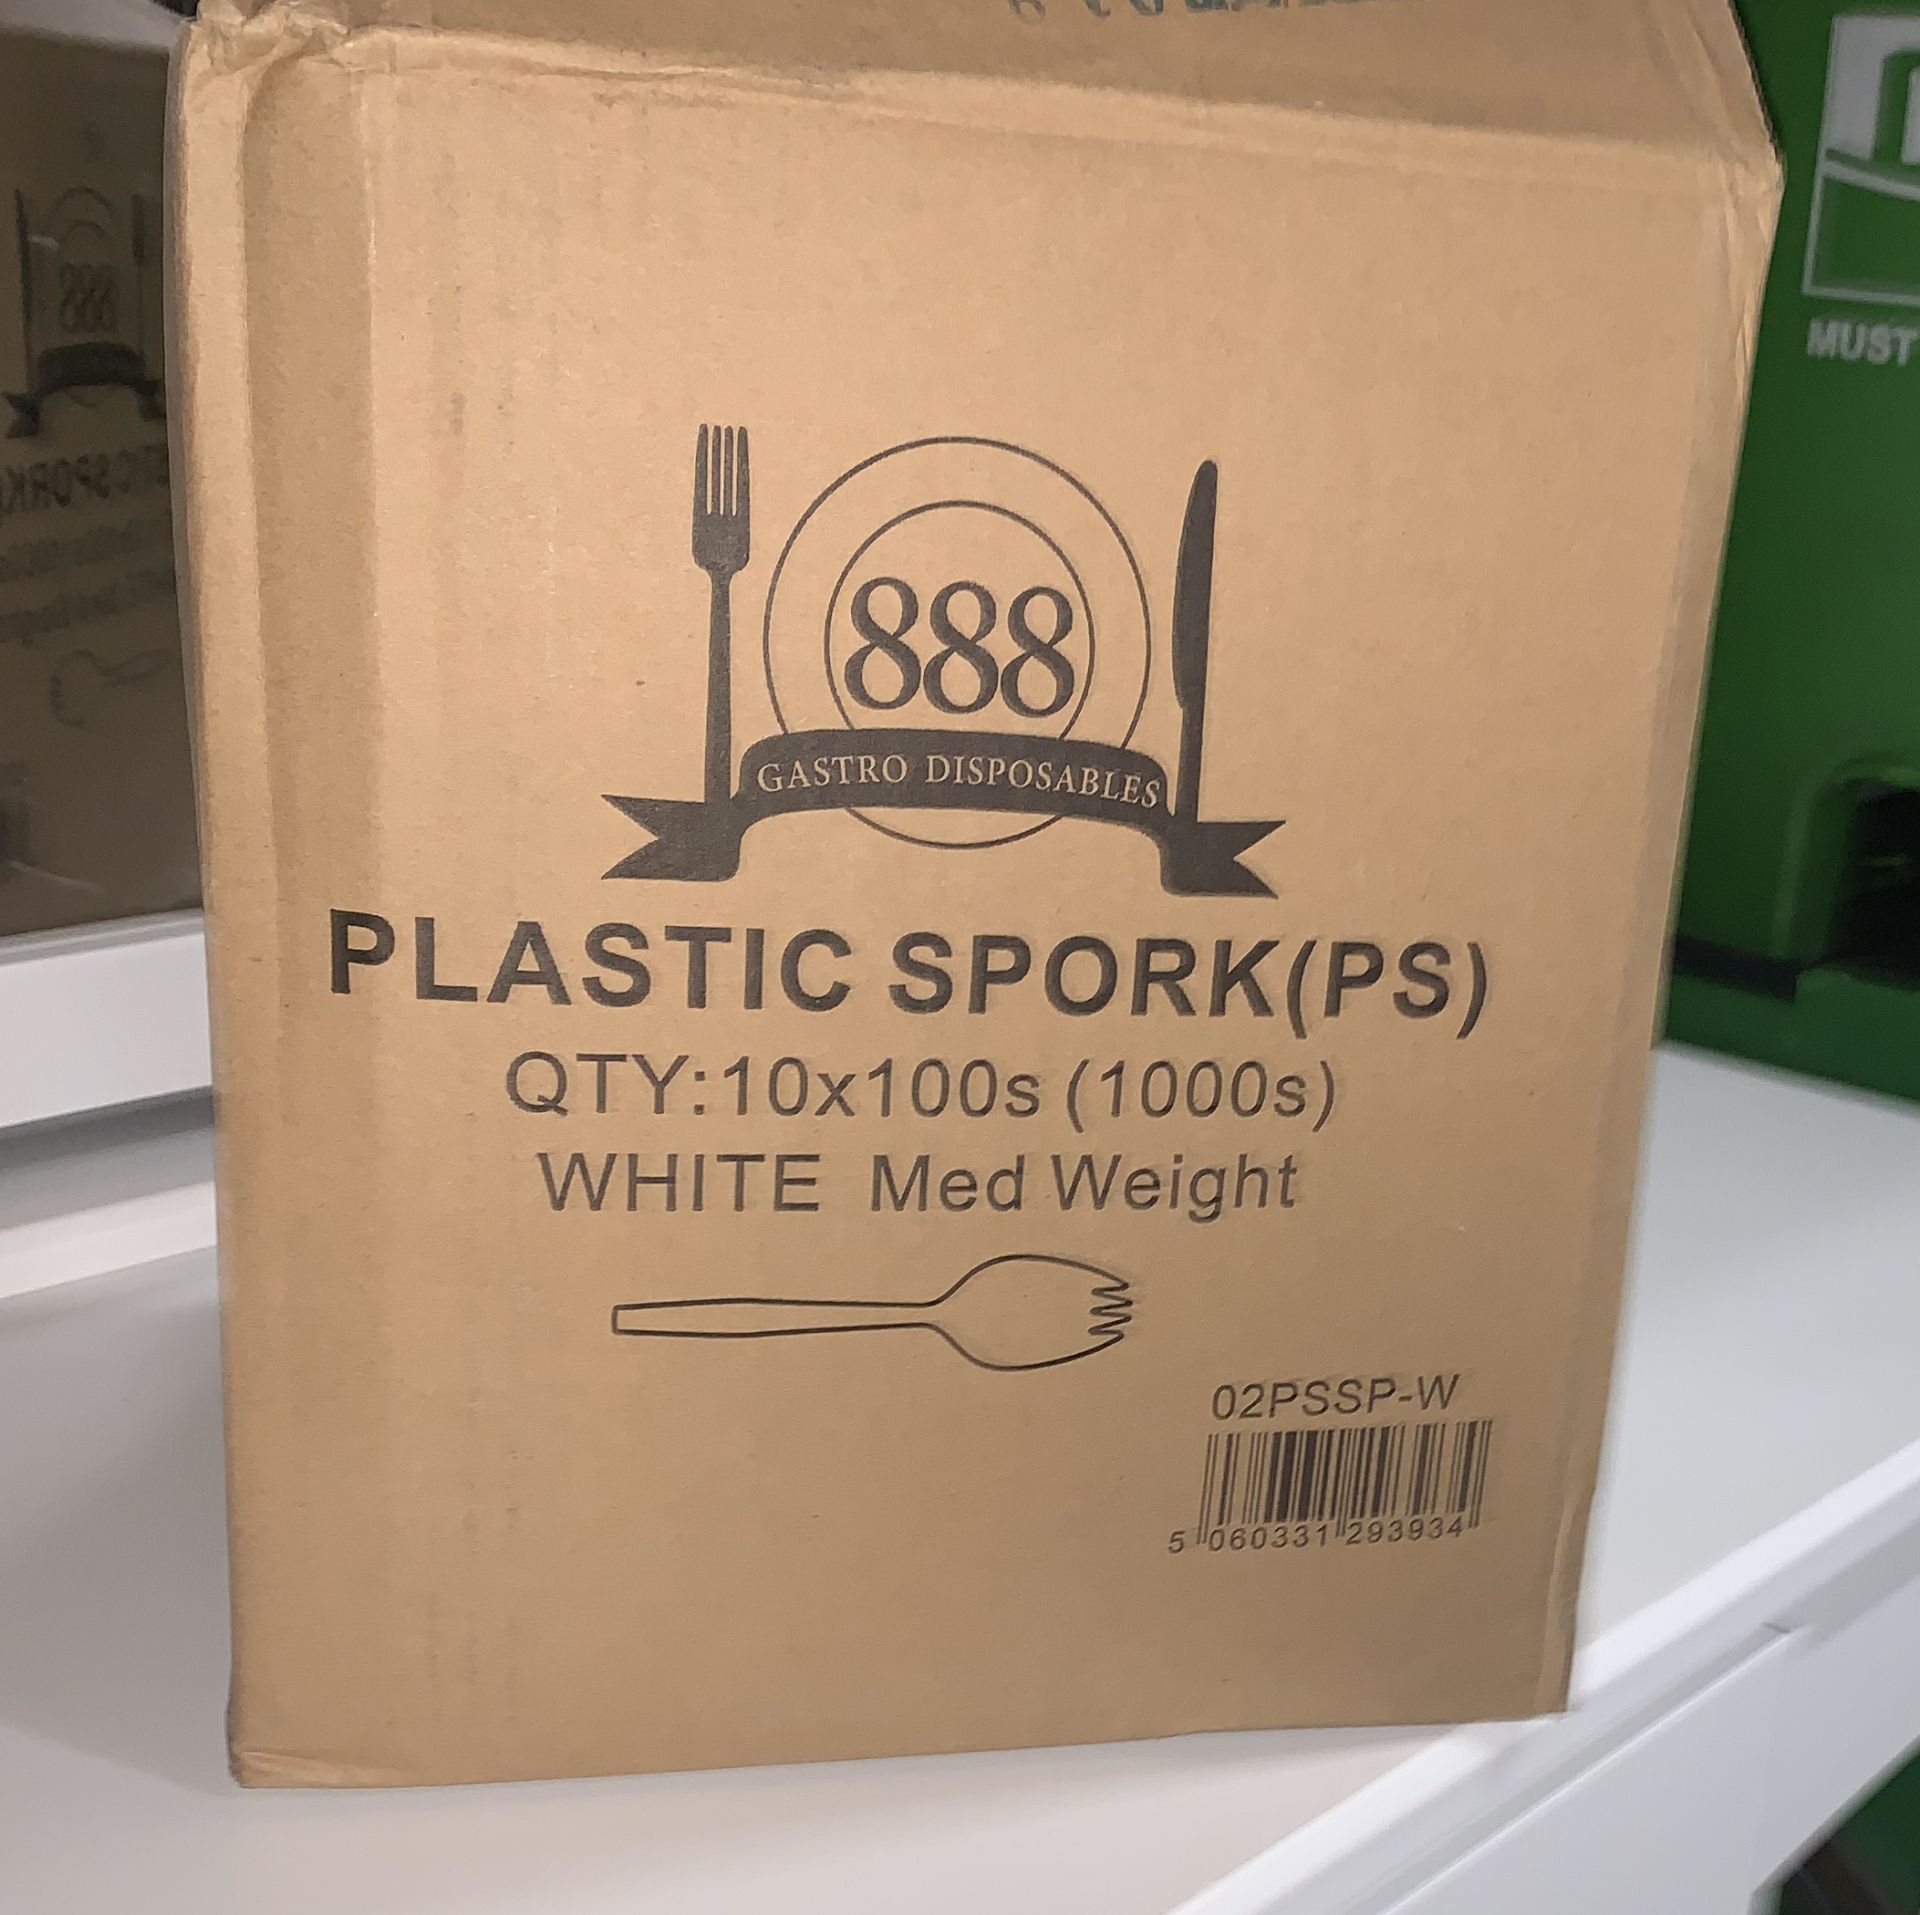 5 x Boxes of 1000 Plastic Sporks by 888 Gastro Disposables - Image 2 of 5